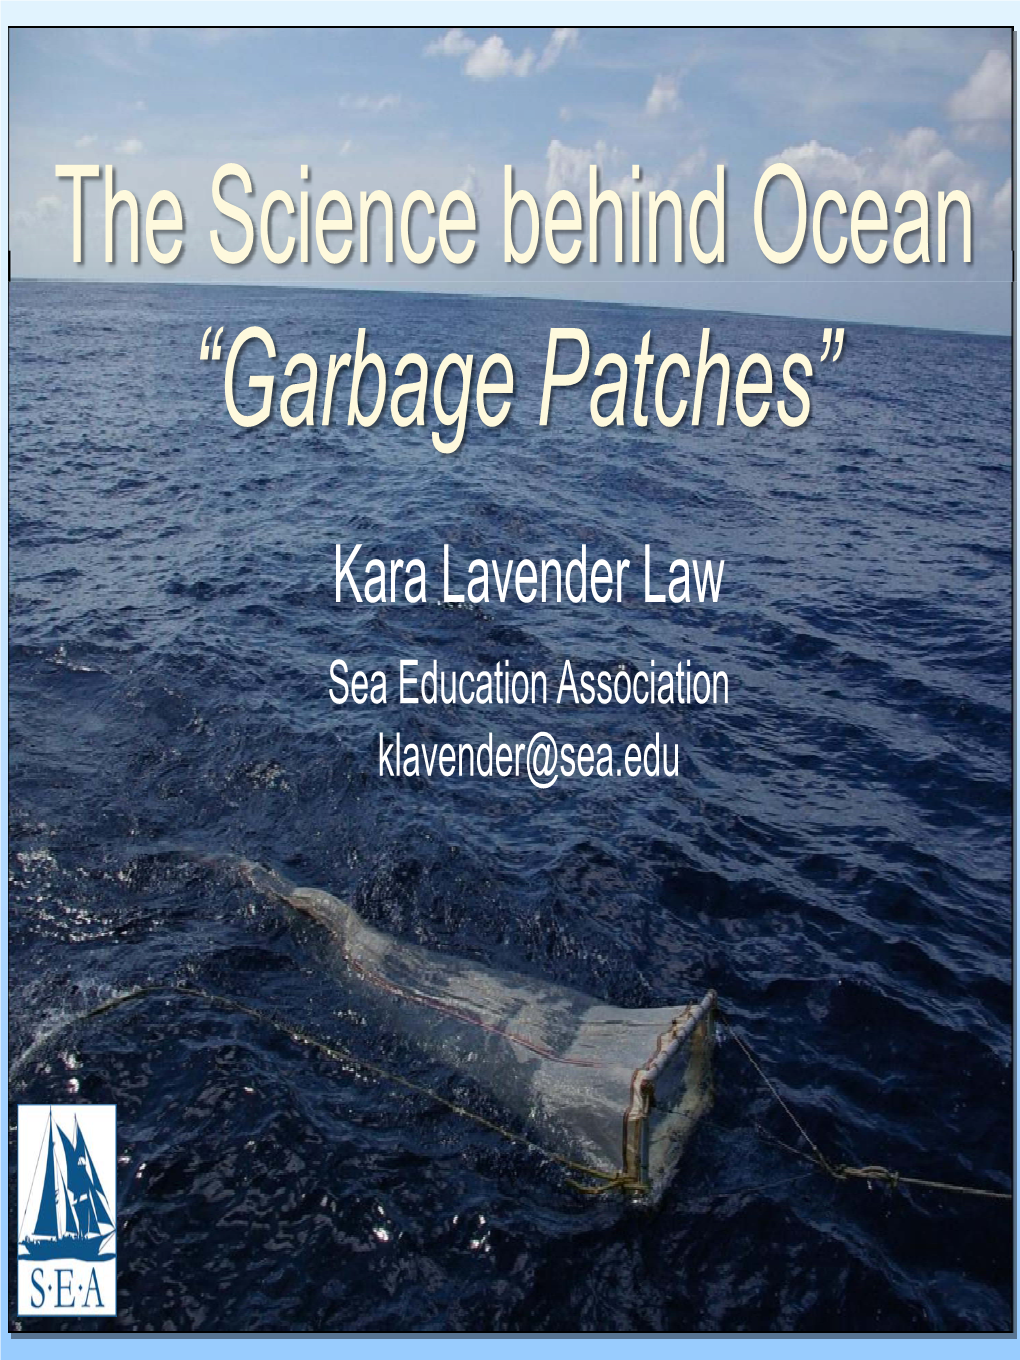 The Science of Ocean Garbage Patches